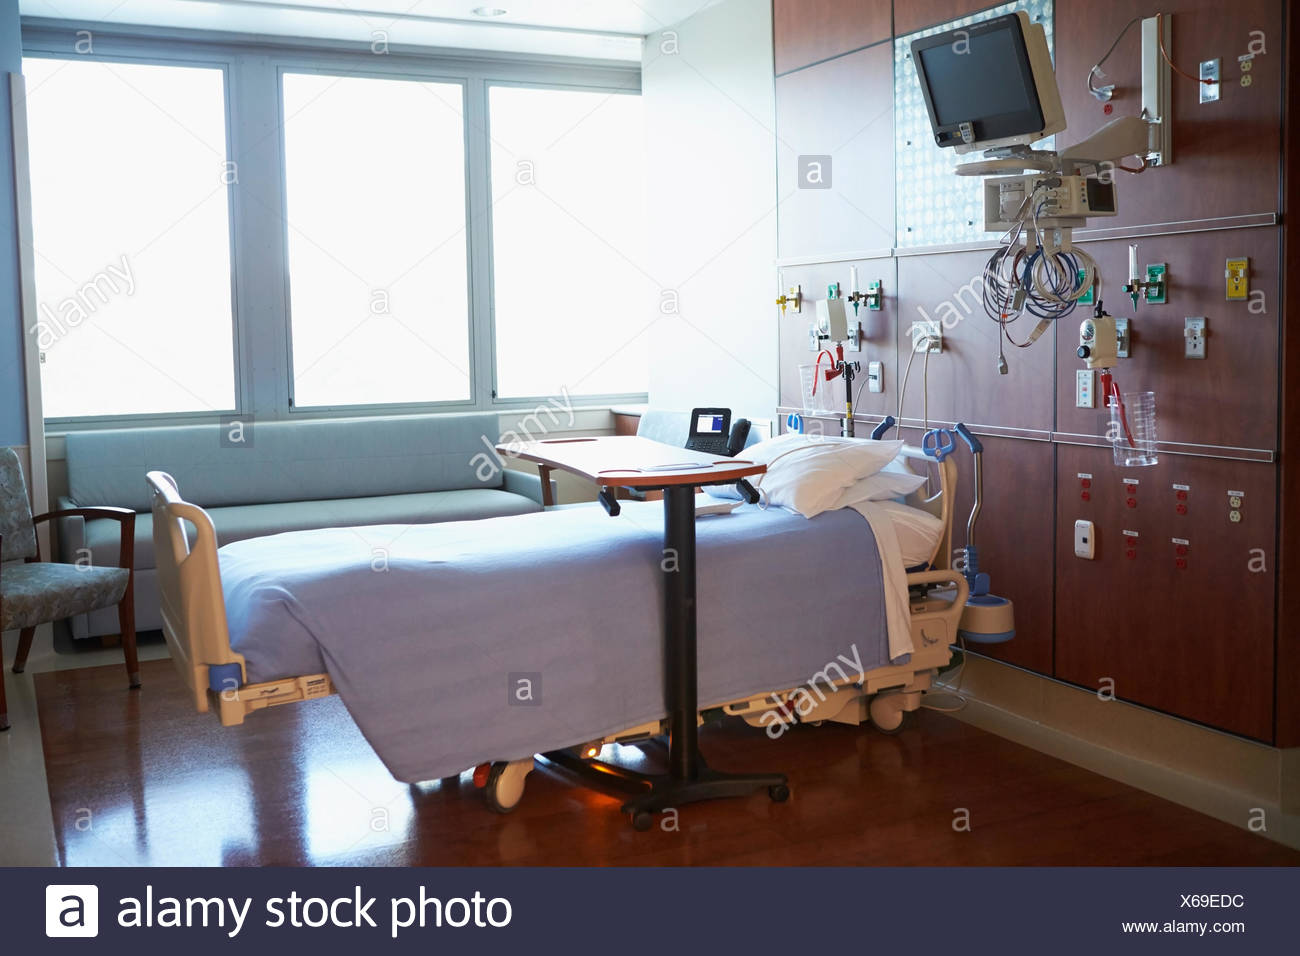 Empty Patient Room In Modern Hospital Stock Photo 279262744